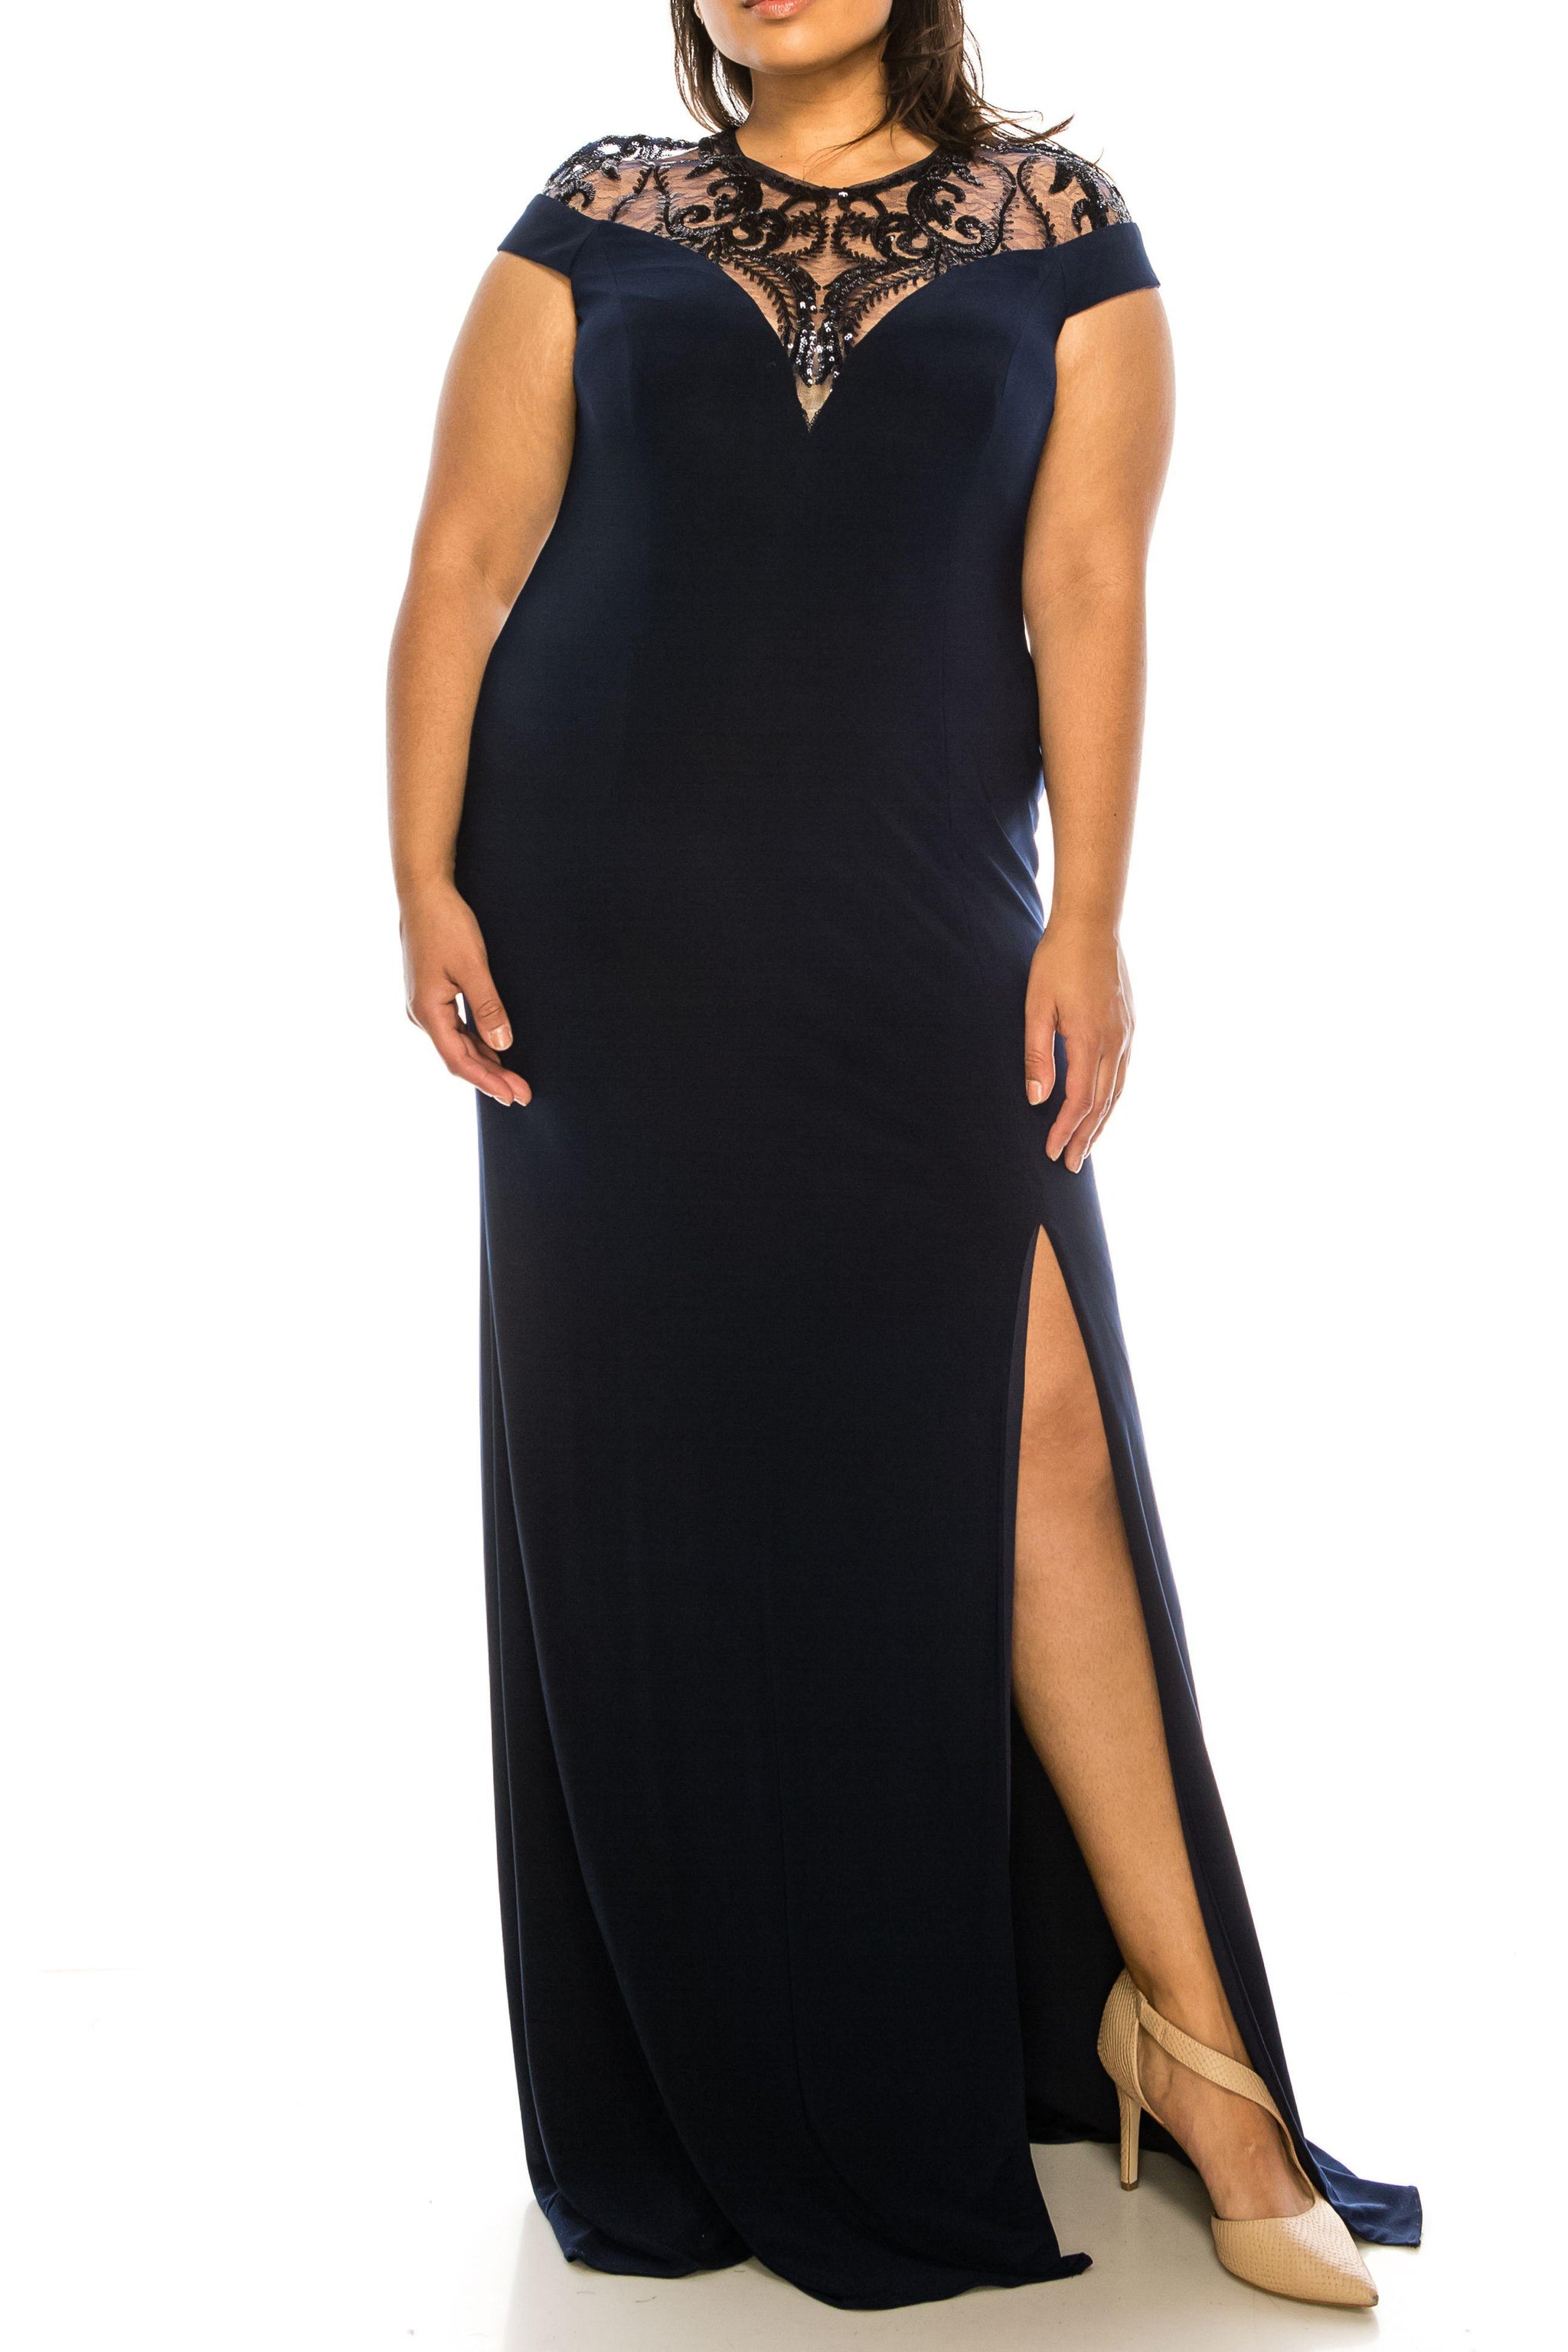 Adrianna Papell AP1E202740 Long Formal Evening Gown | The Dress Outlet